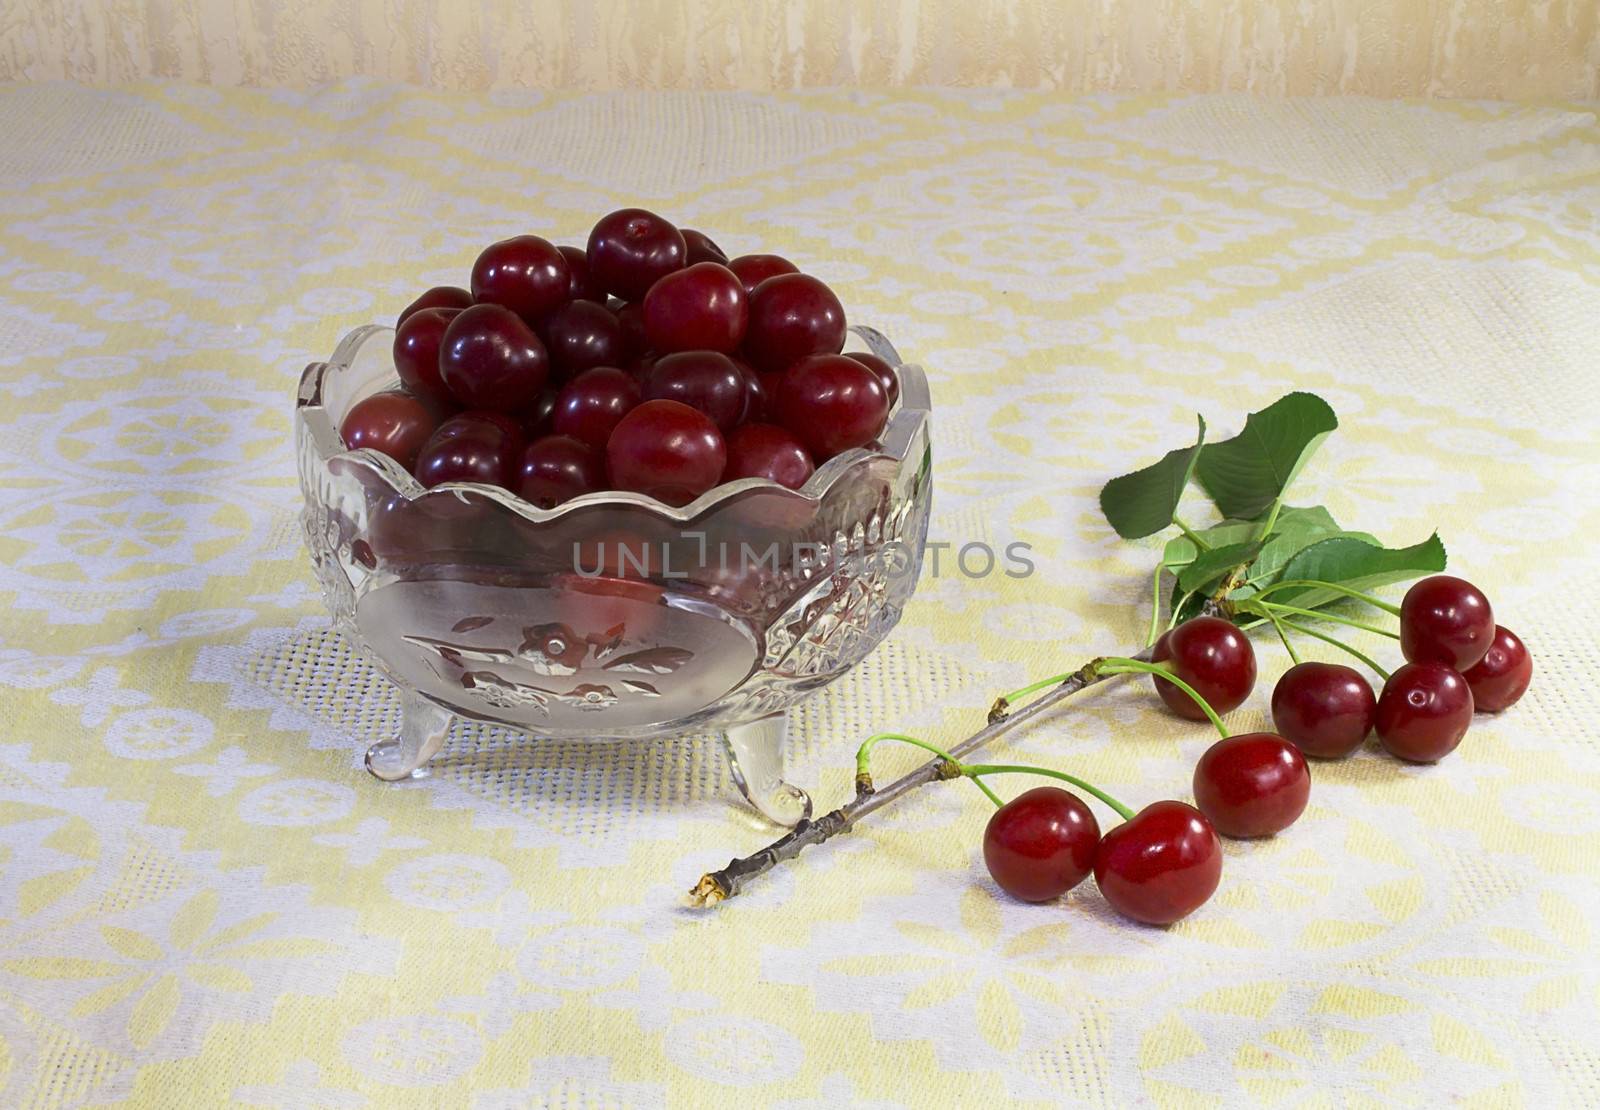 Cherries in a crystal vase on the table by georgina198